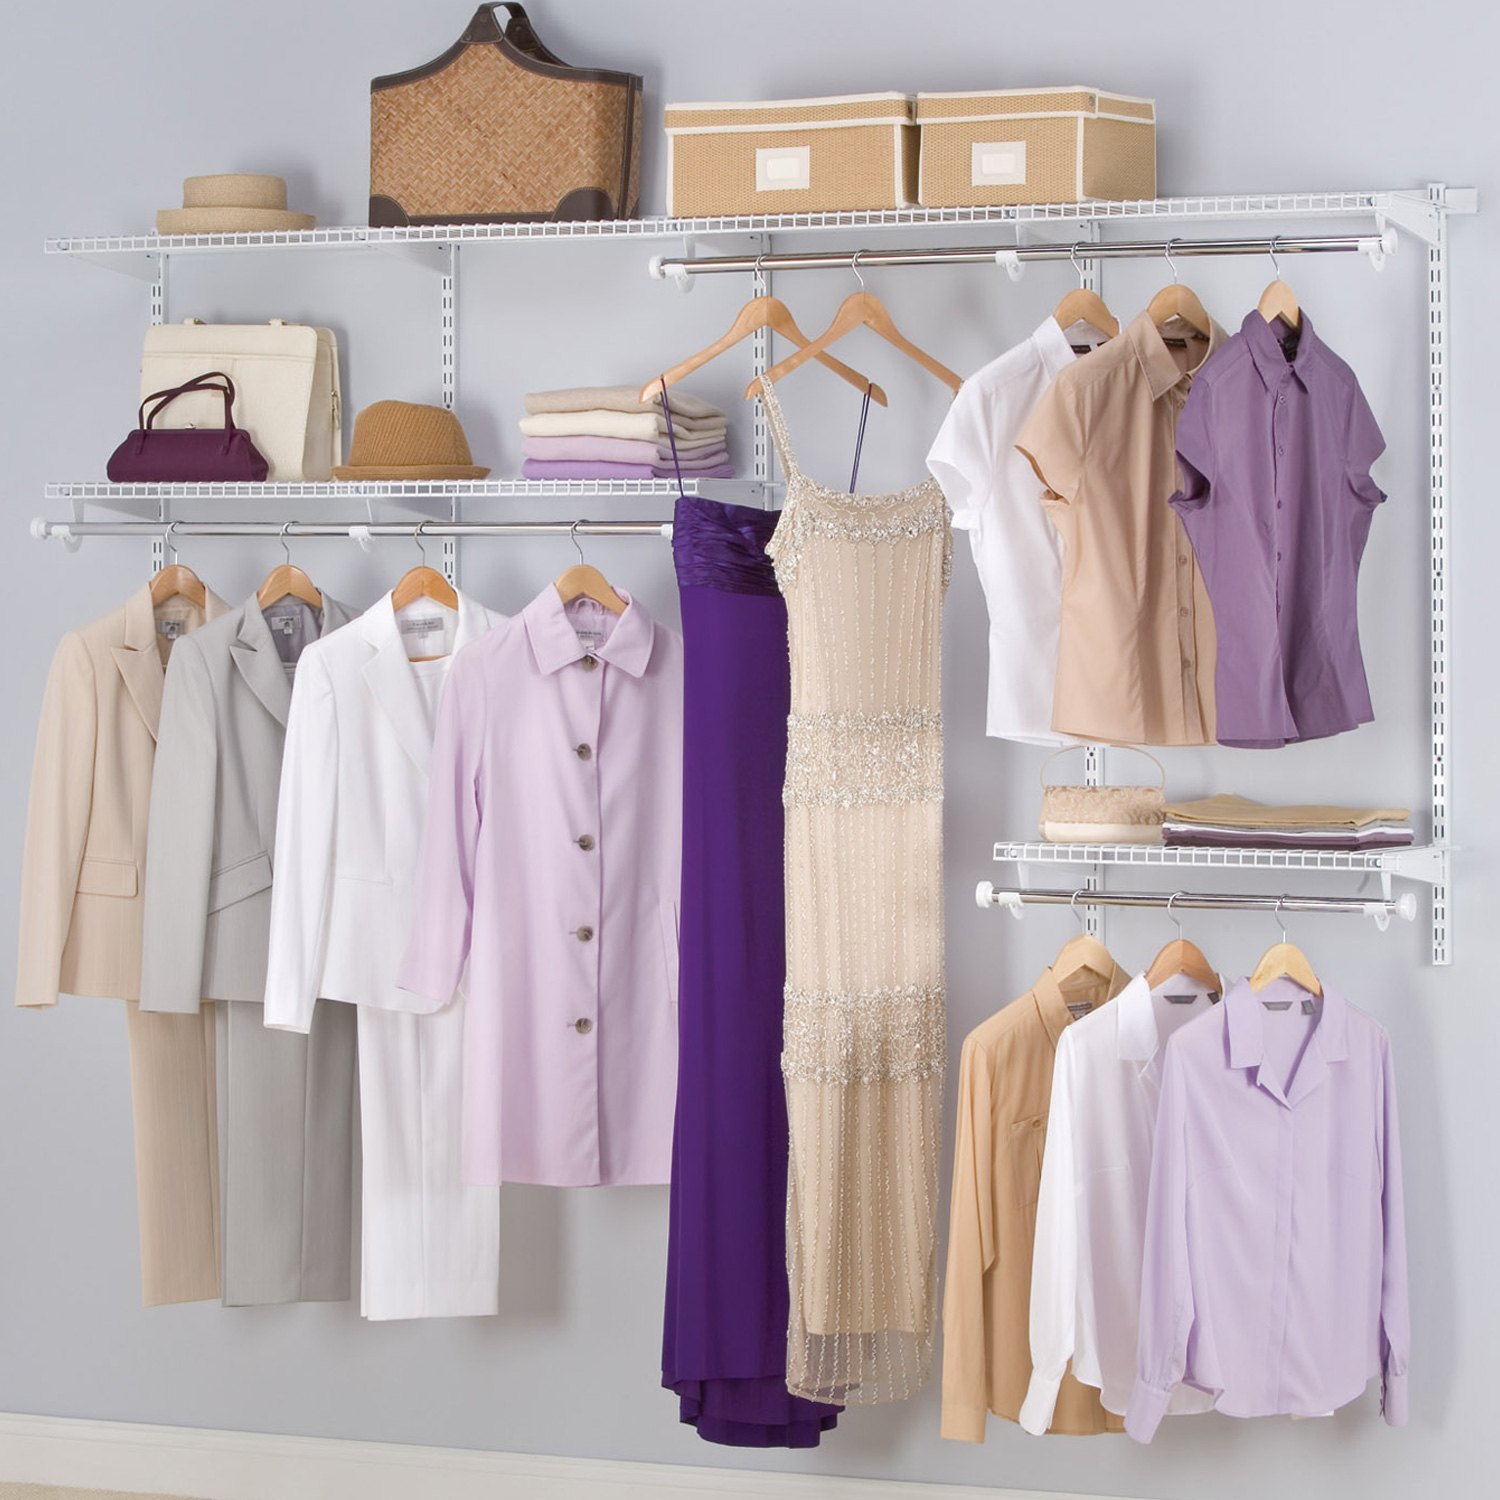 Rubbermaid Configurations 4 Ft. to 8 Ft. No-Cut Adjustable Closet Kit -  Dazey's Supply